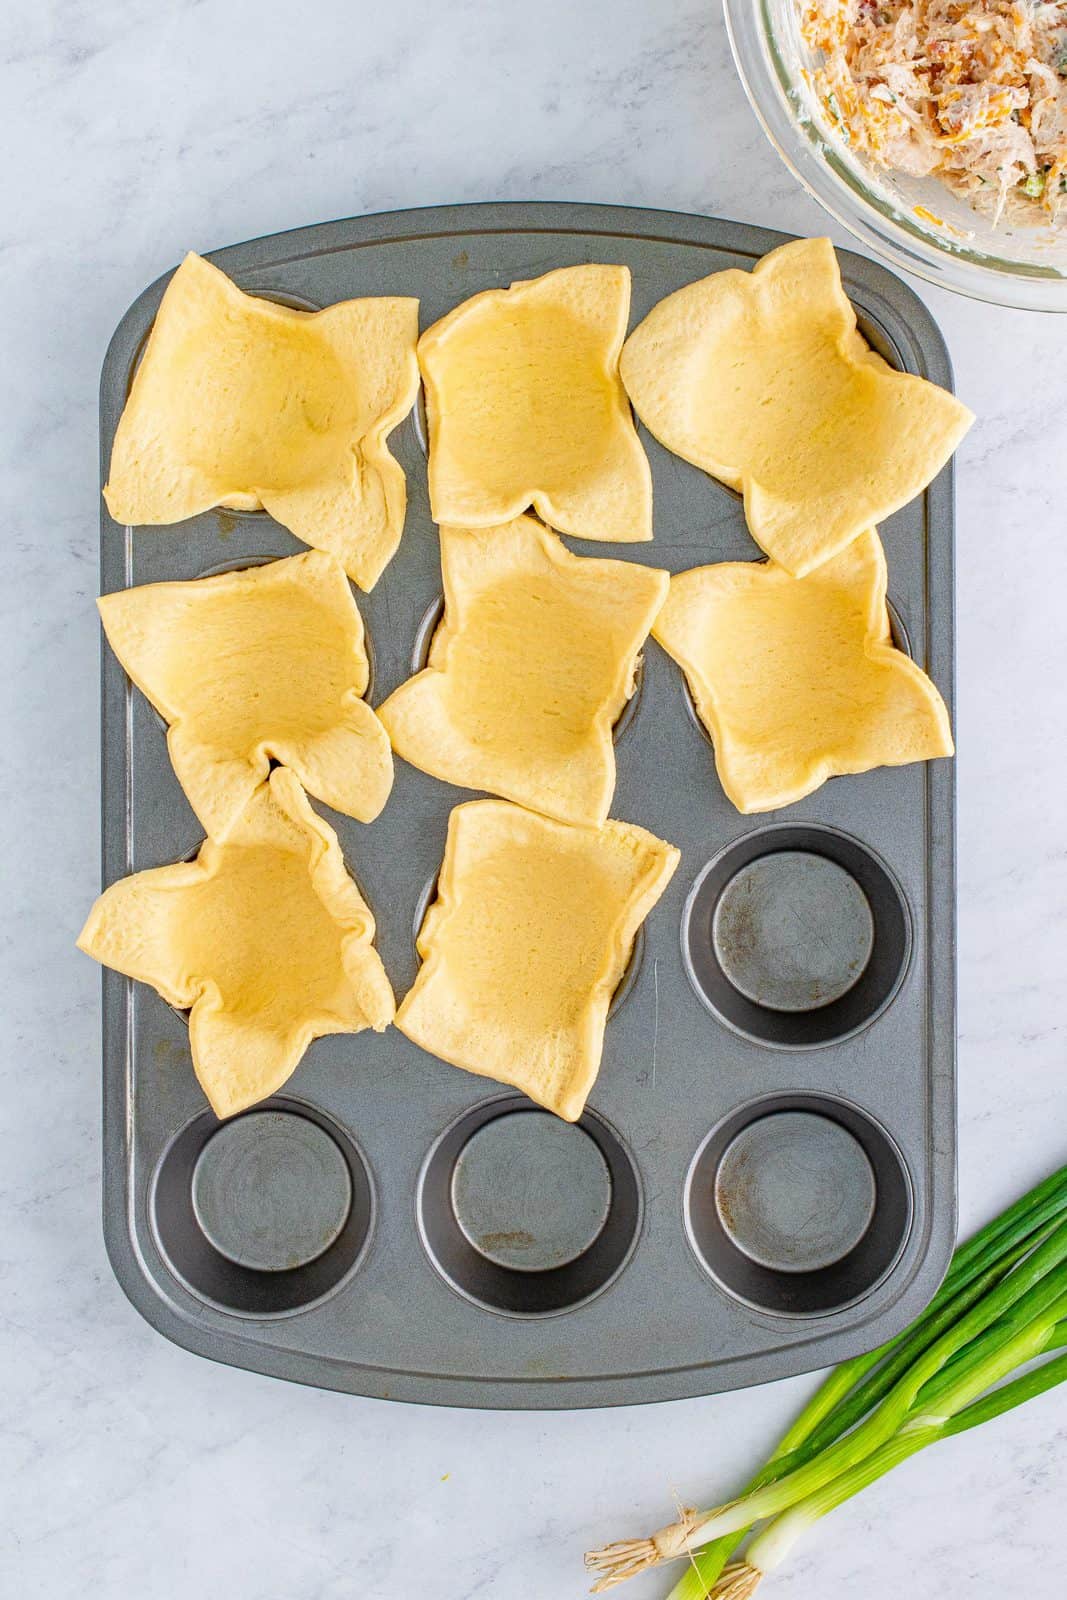 Crescent roll dough sheet cut and placed in muffin tin.